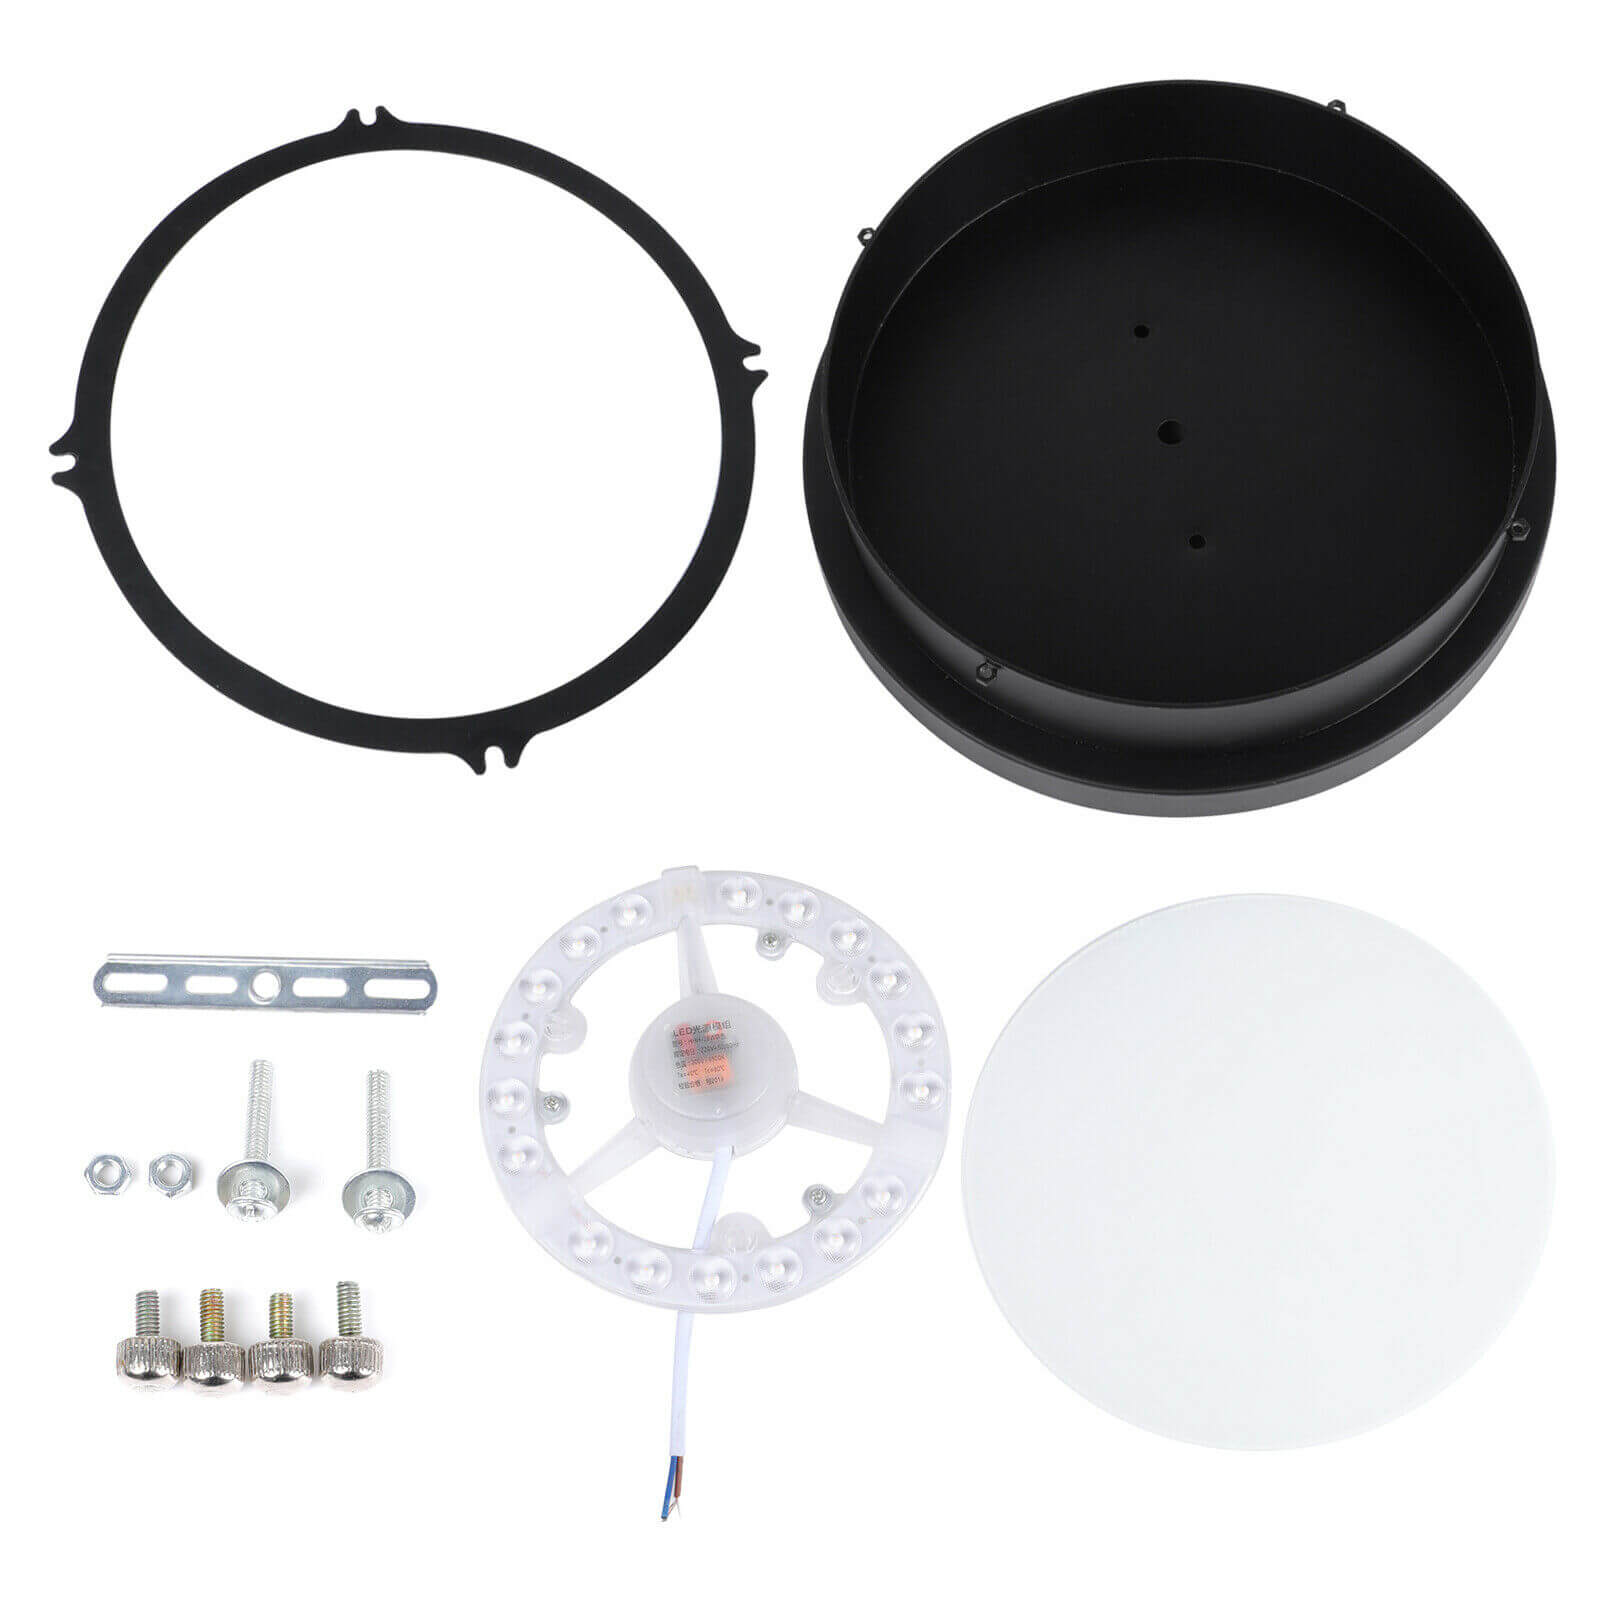 12W LED Ceiling Light package includes